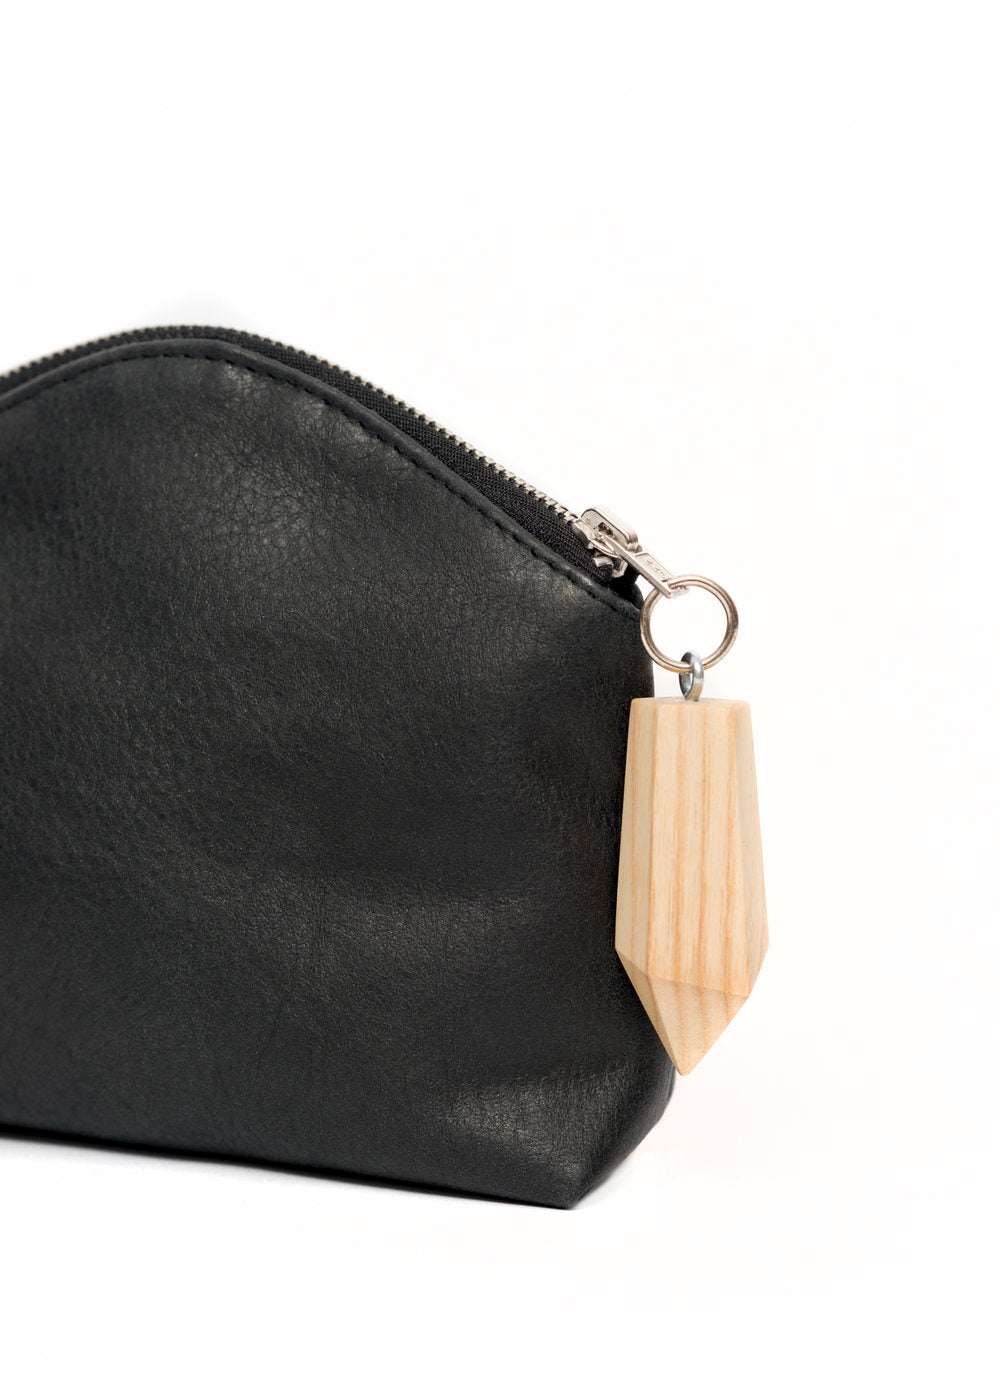 Leather case with wood tassel FRAXINUS 6 made to order